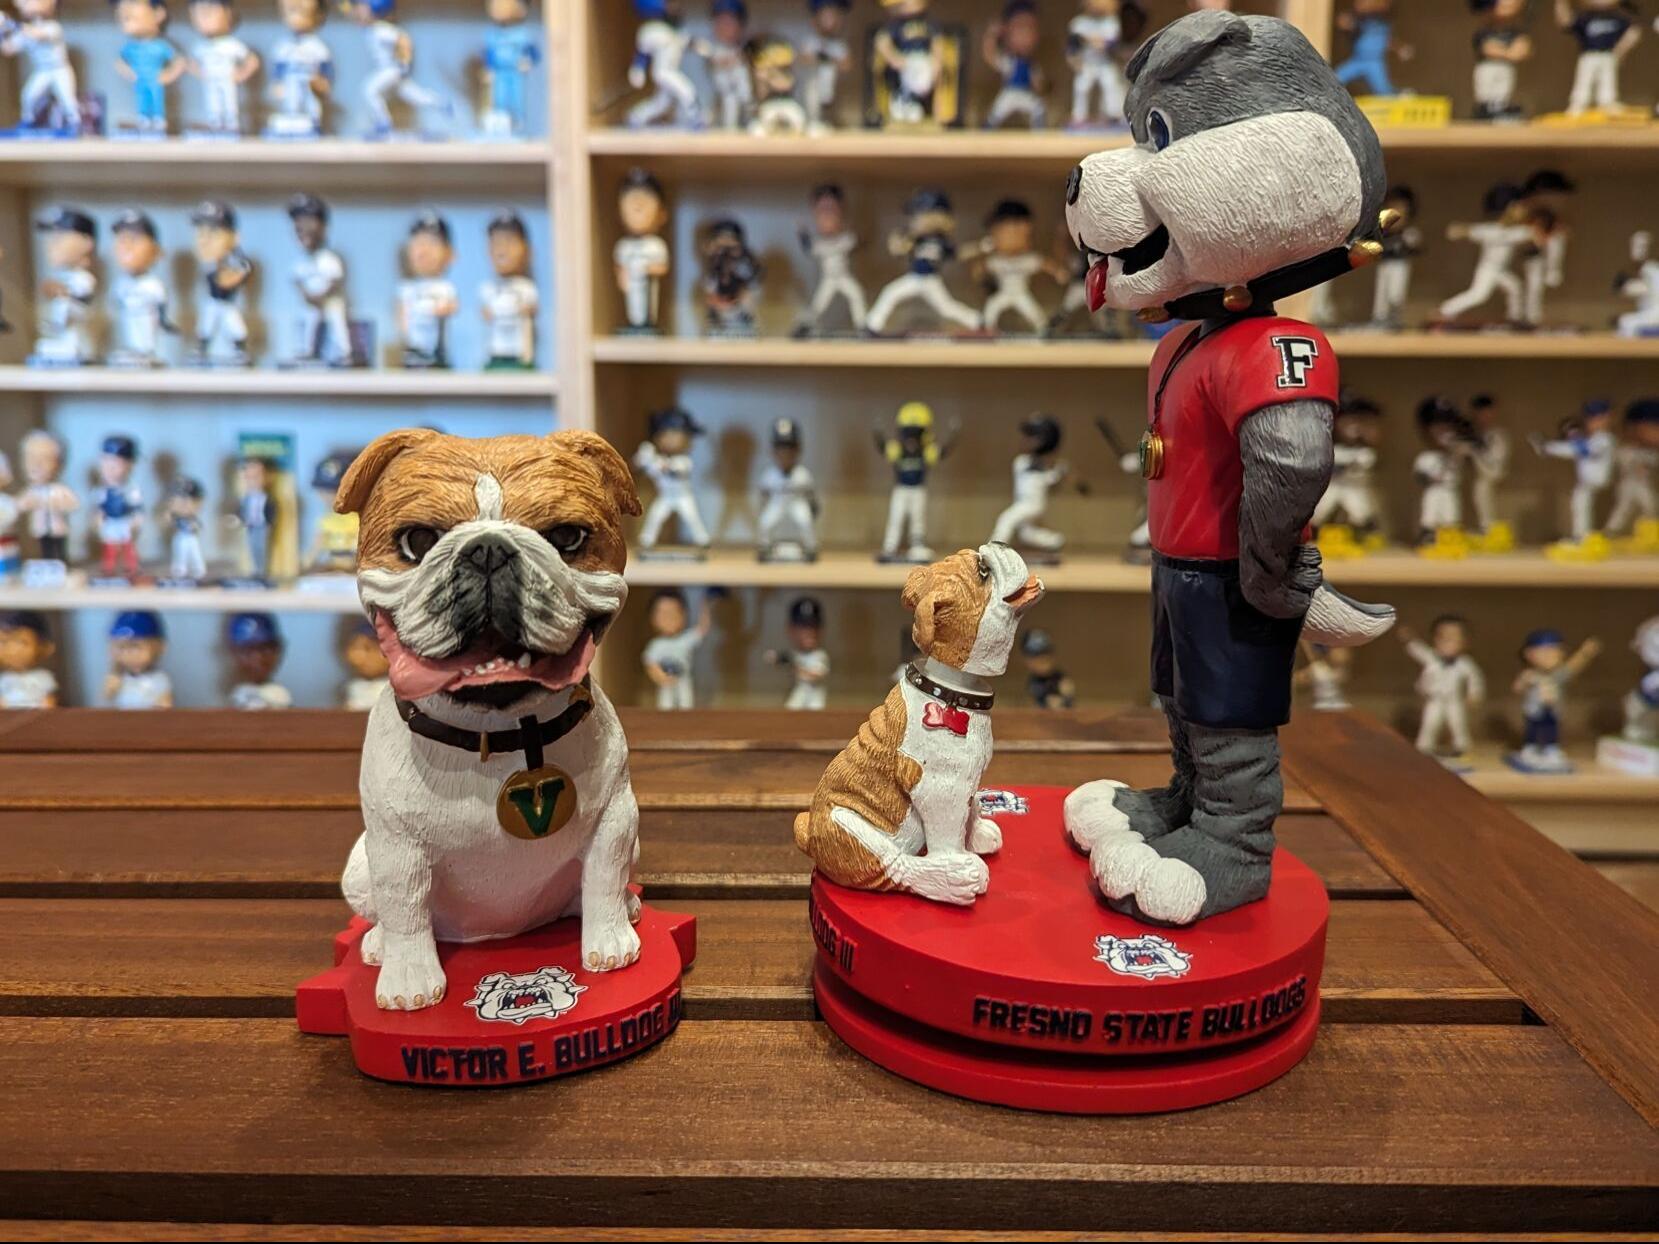 Official Fresno State Victor. E Bulldogs bobbleheads released